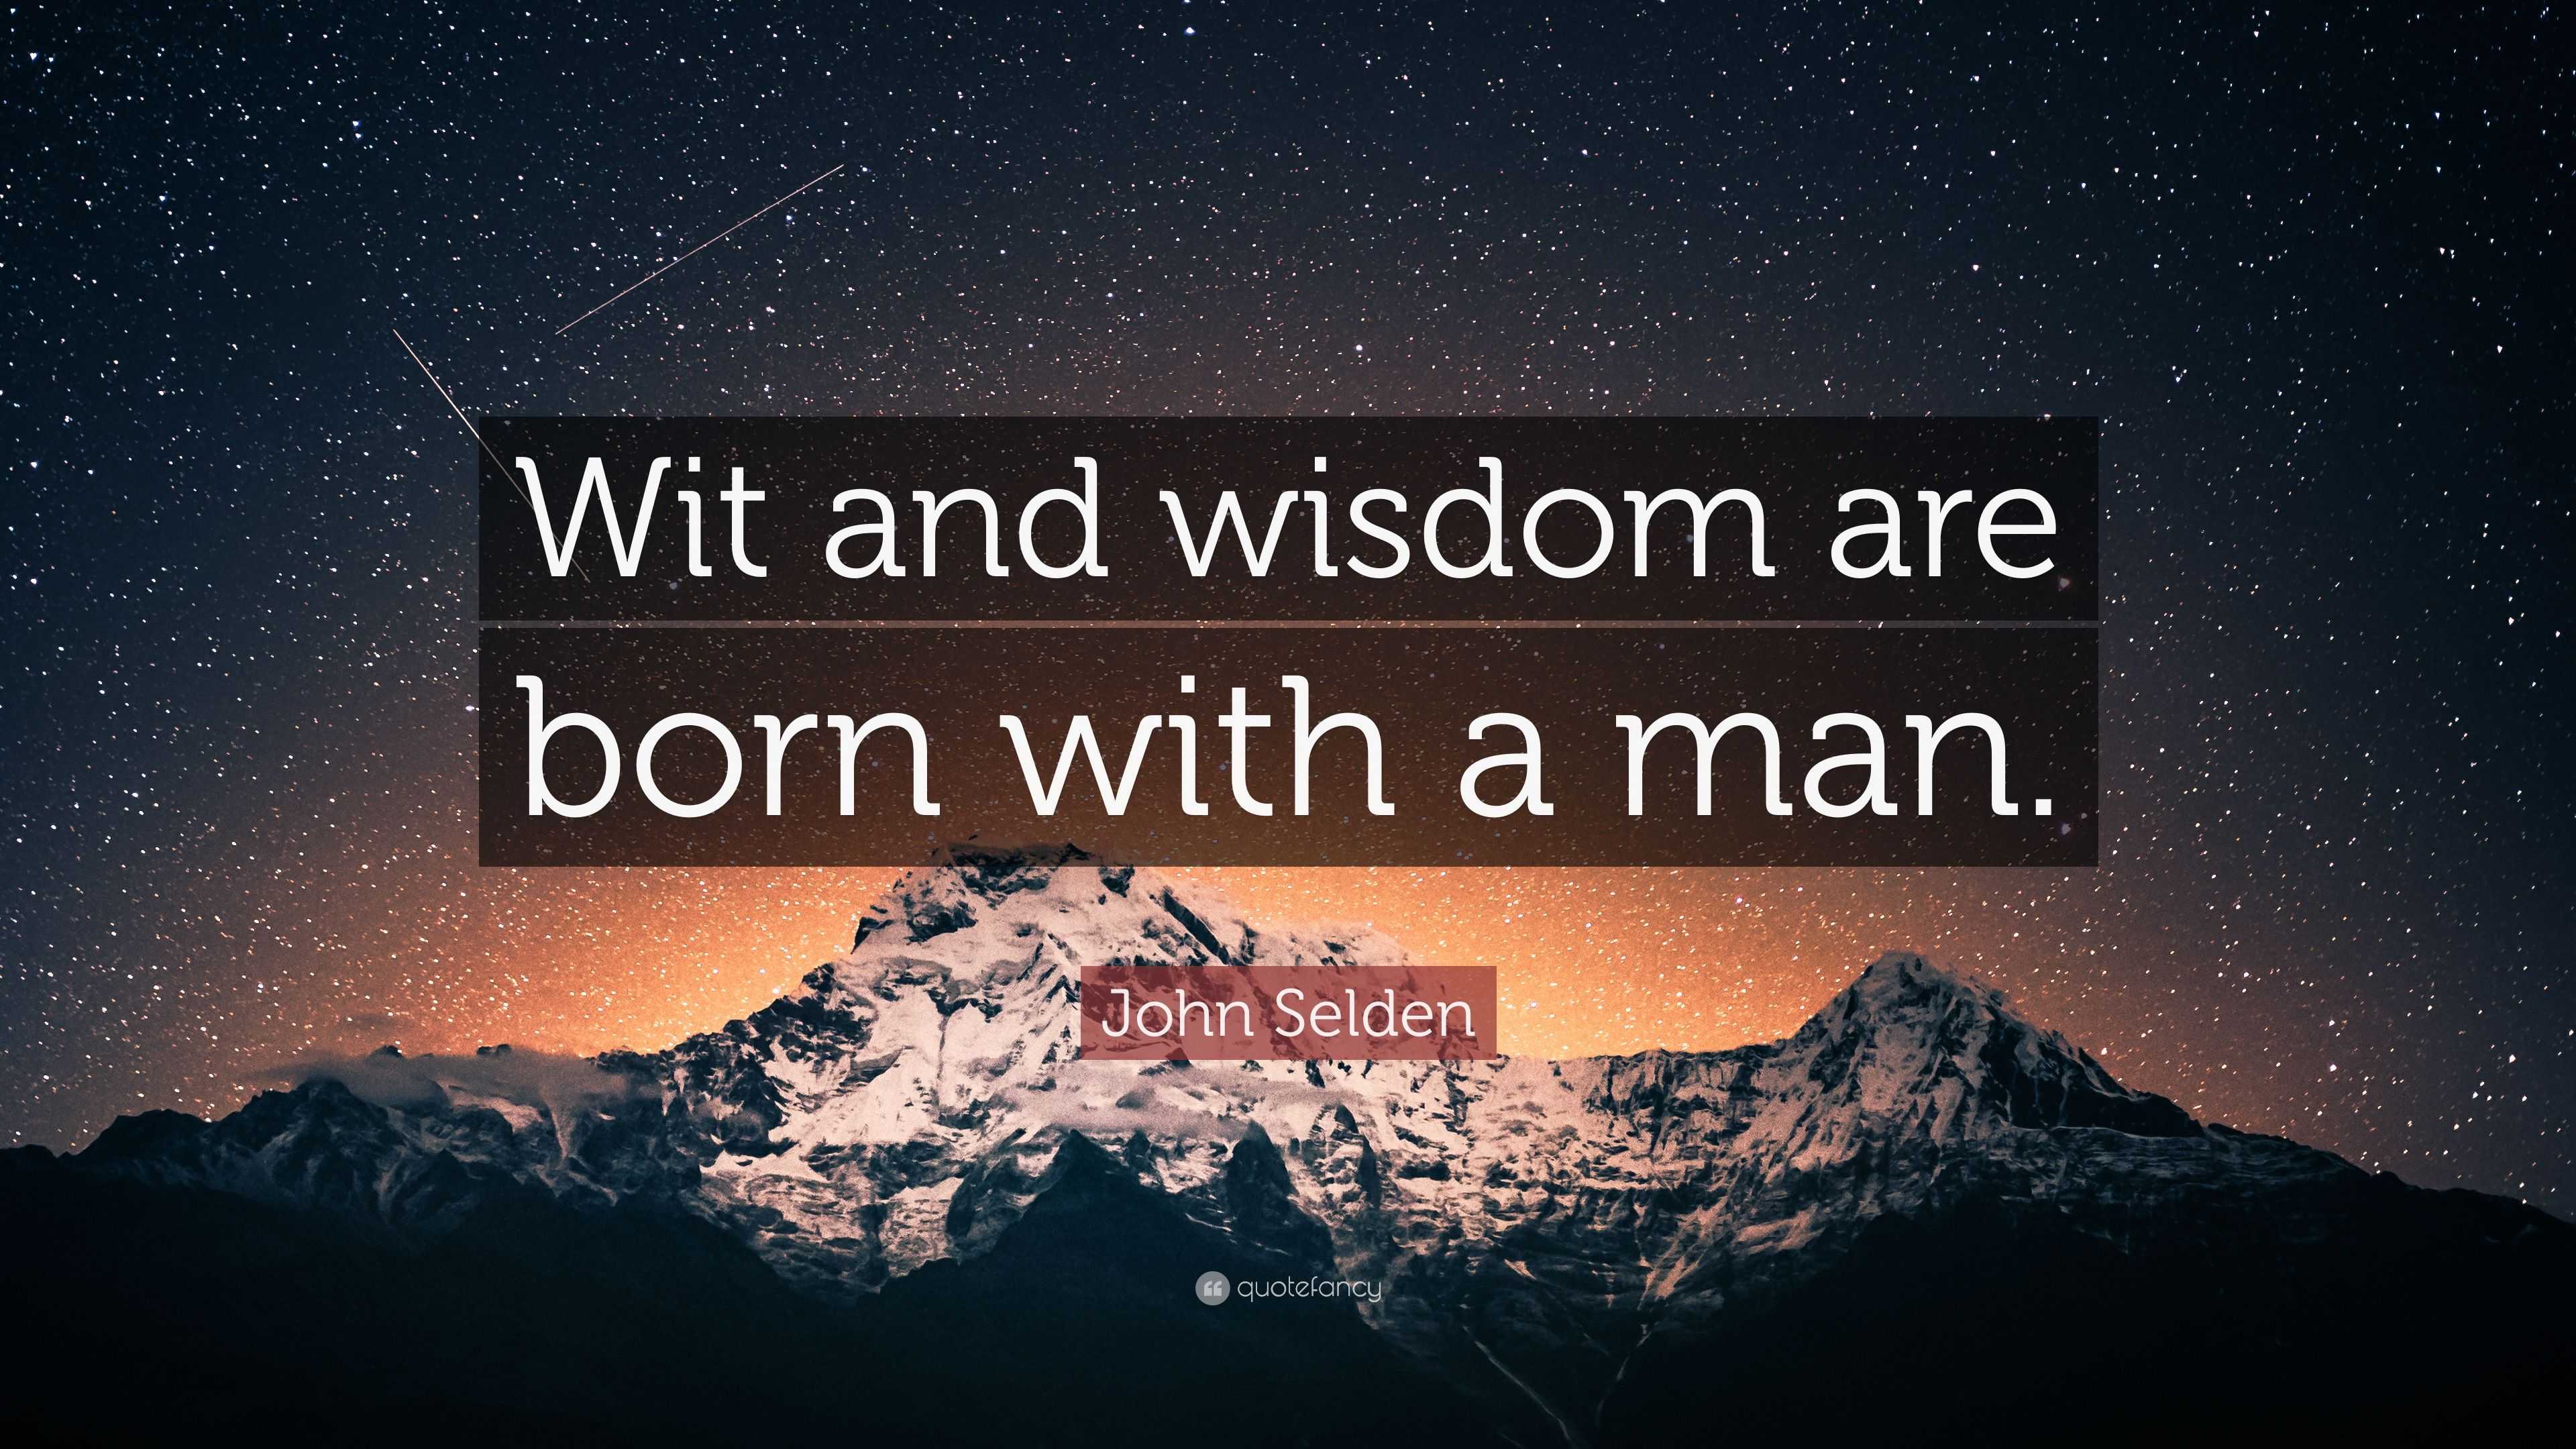 John Selden Quote: “Wit and wisdom are born with a man.”